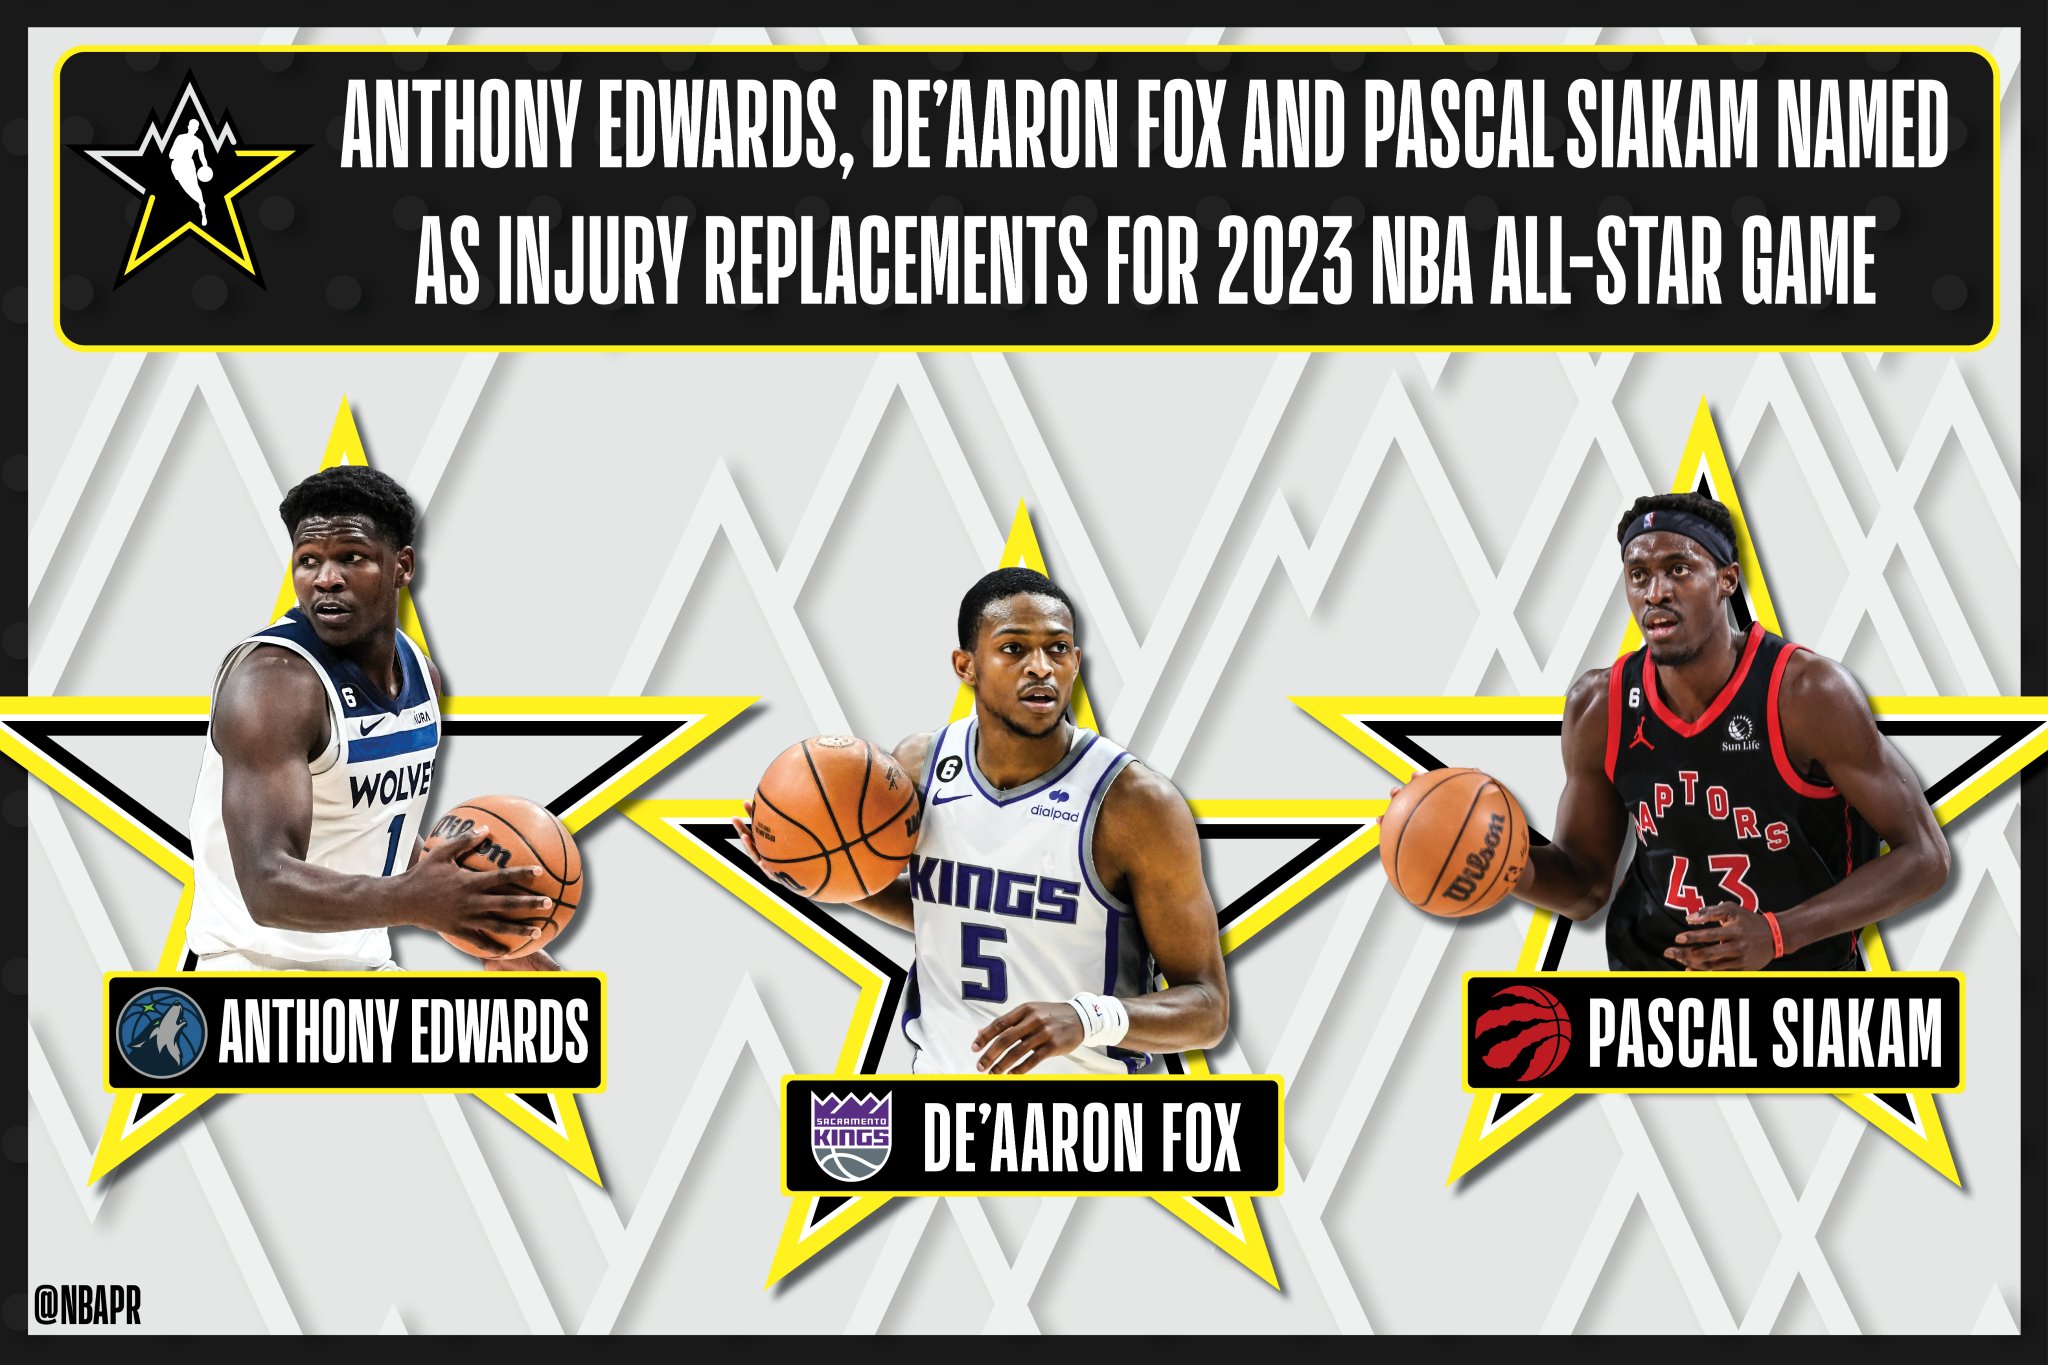 Anthony Edwards, De'Aaron Fox, Pascal Siakam named injury replacements for  All-Star Game